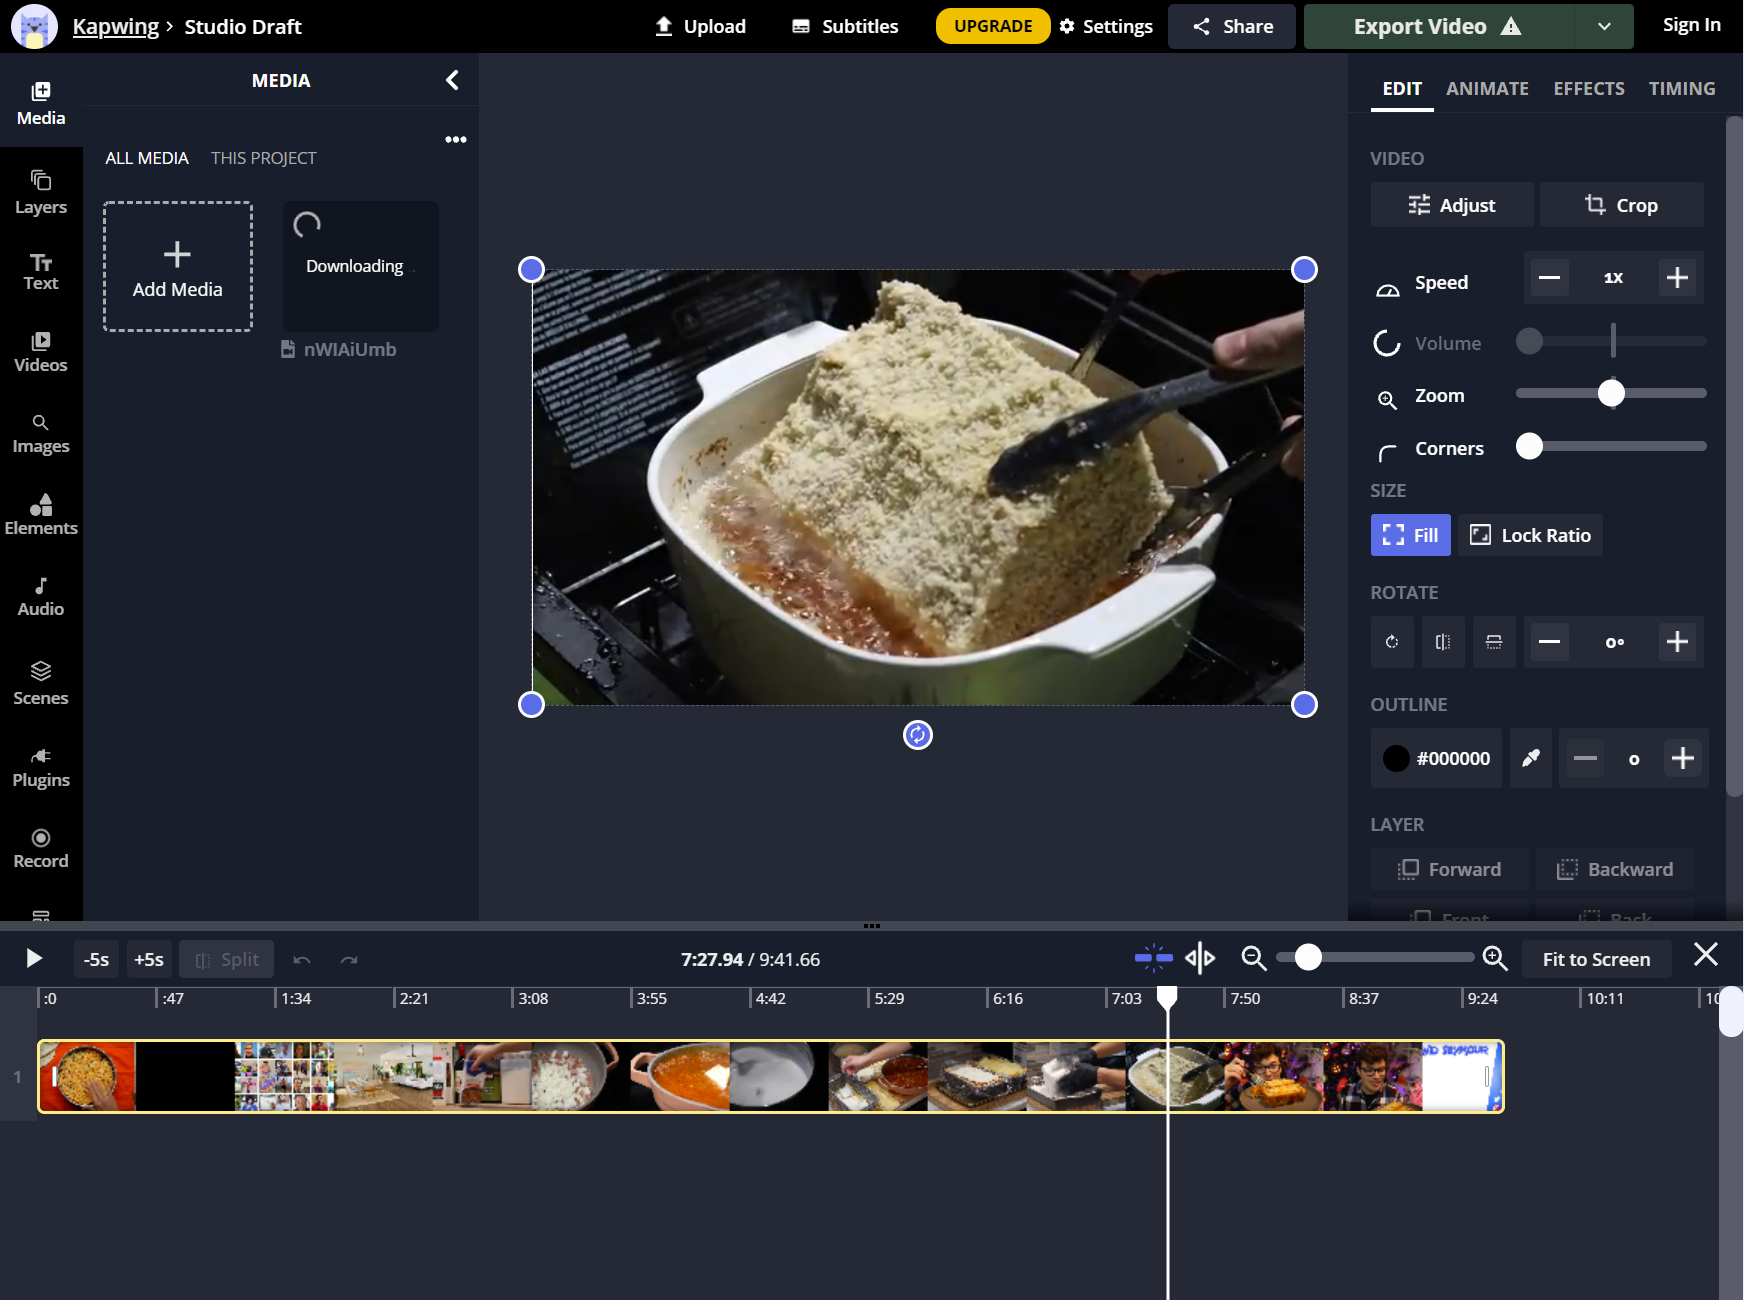 Creating a video about deep-fried lasagna on Kapwing.